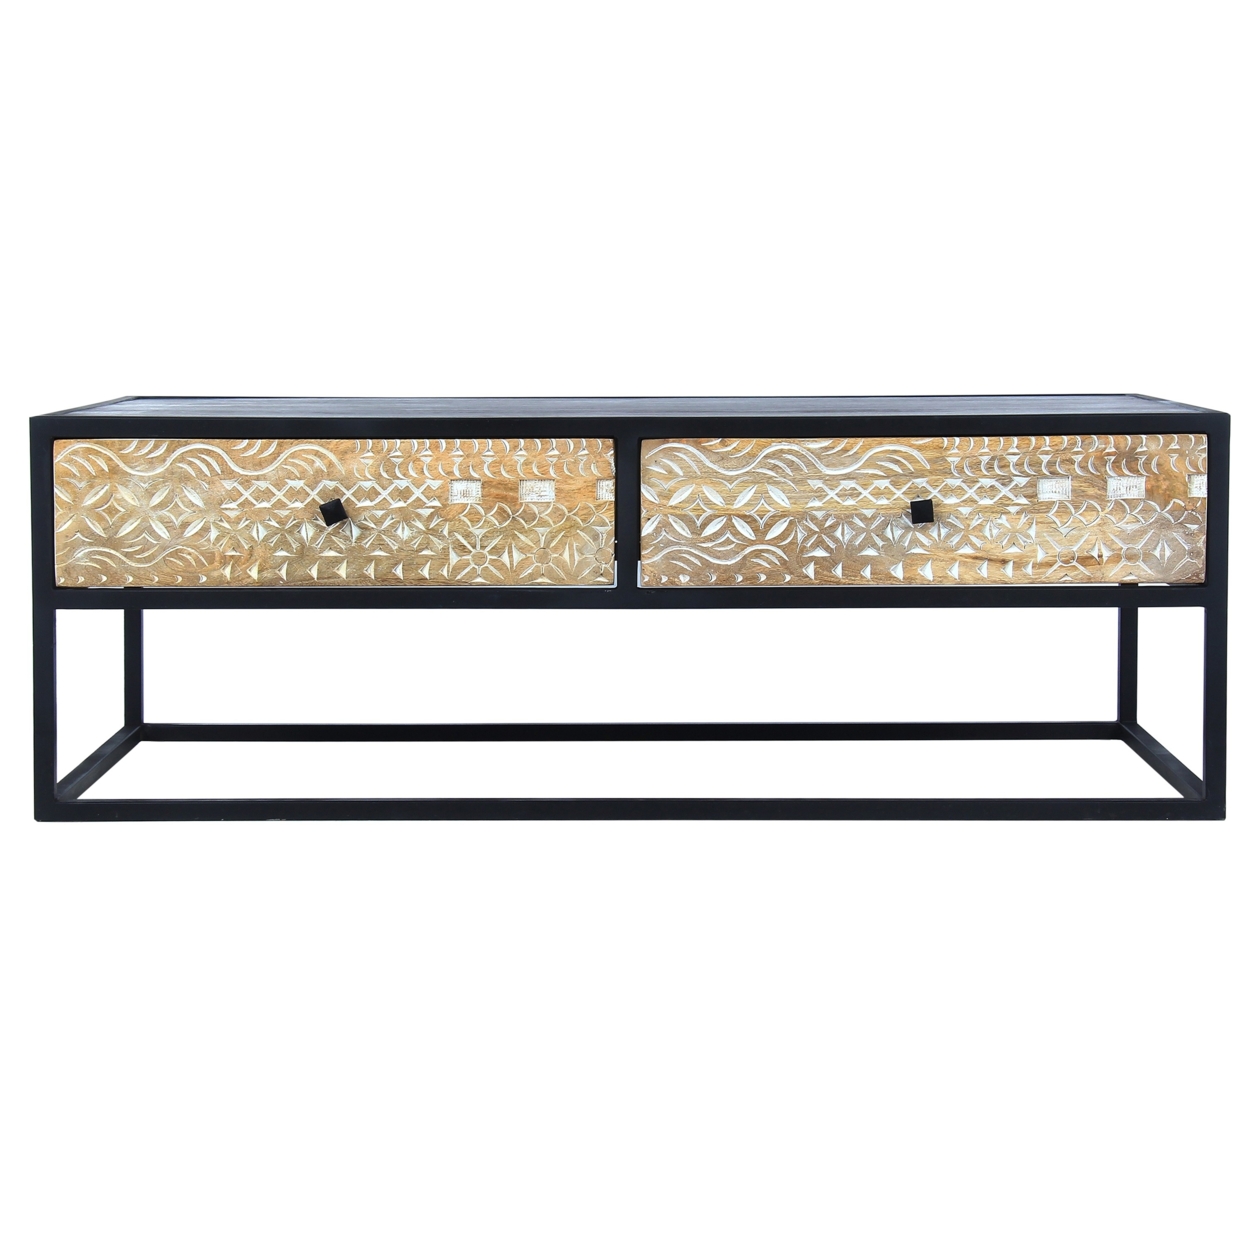 45 Inch Carson Rectangular Mango Wood Coffee Table With Metal Frame And 2 Drawers, Brown And Black- Saltoro Sherpi